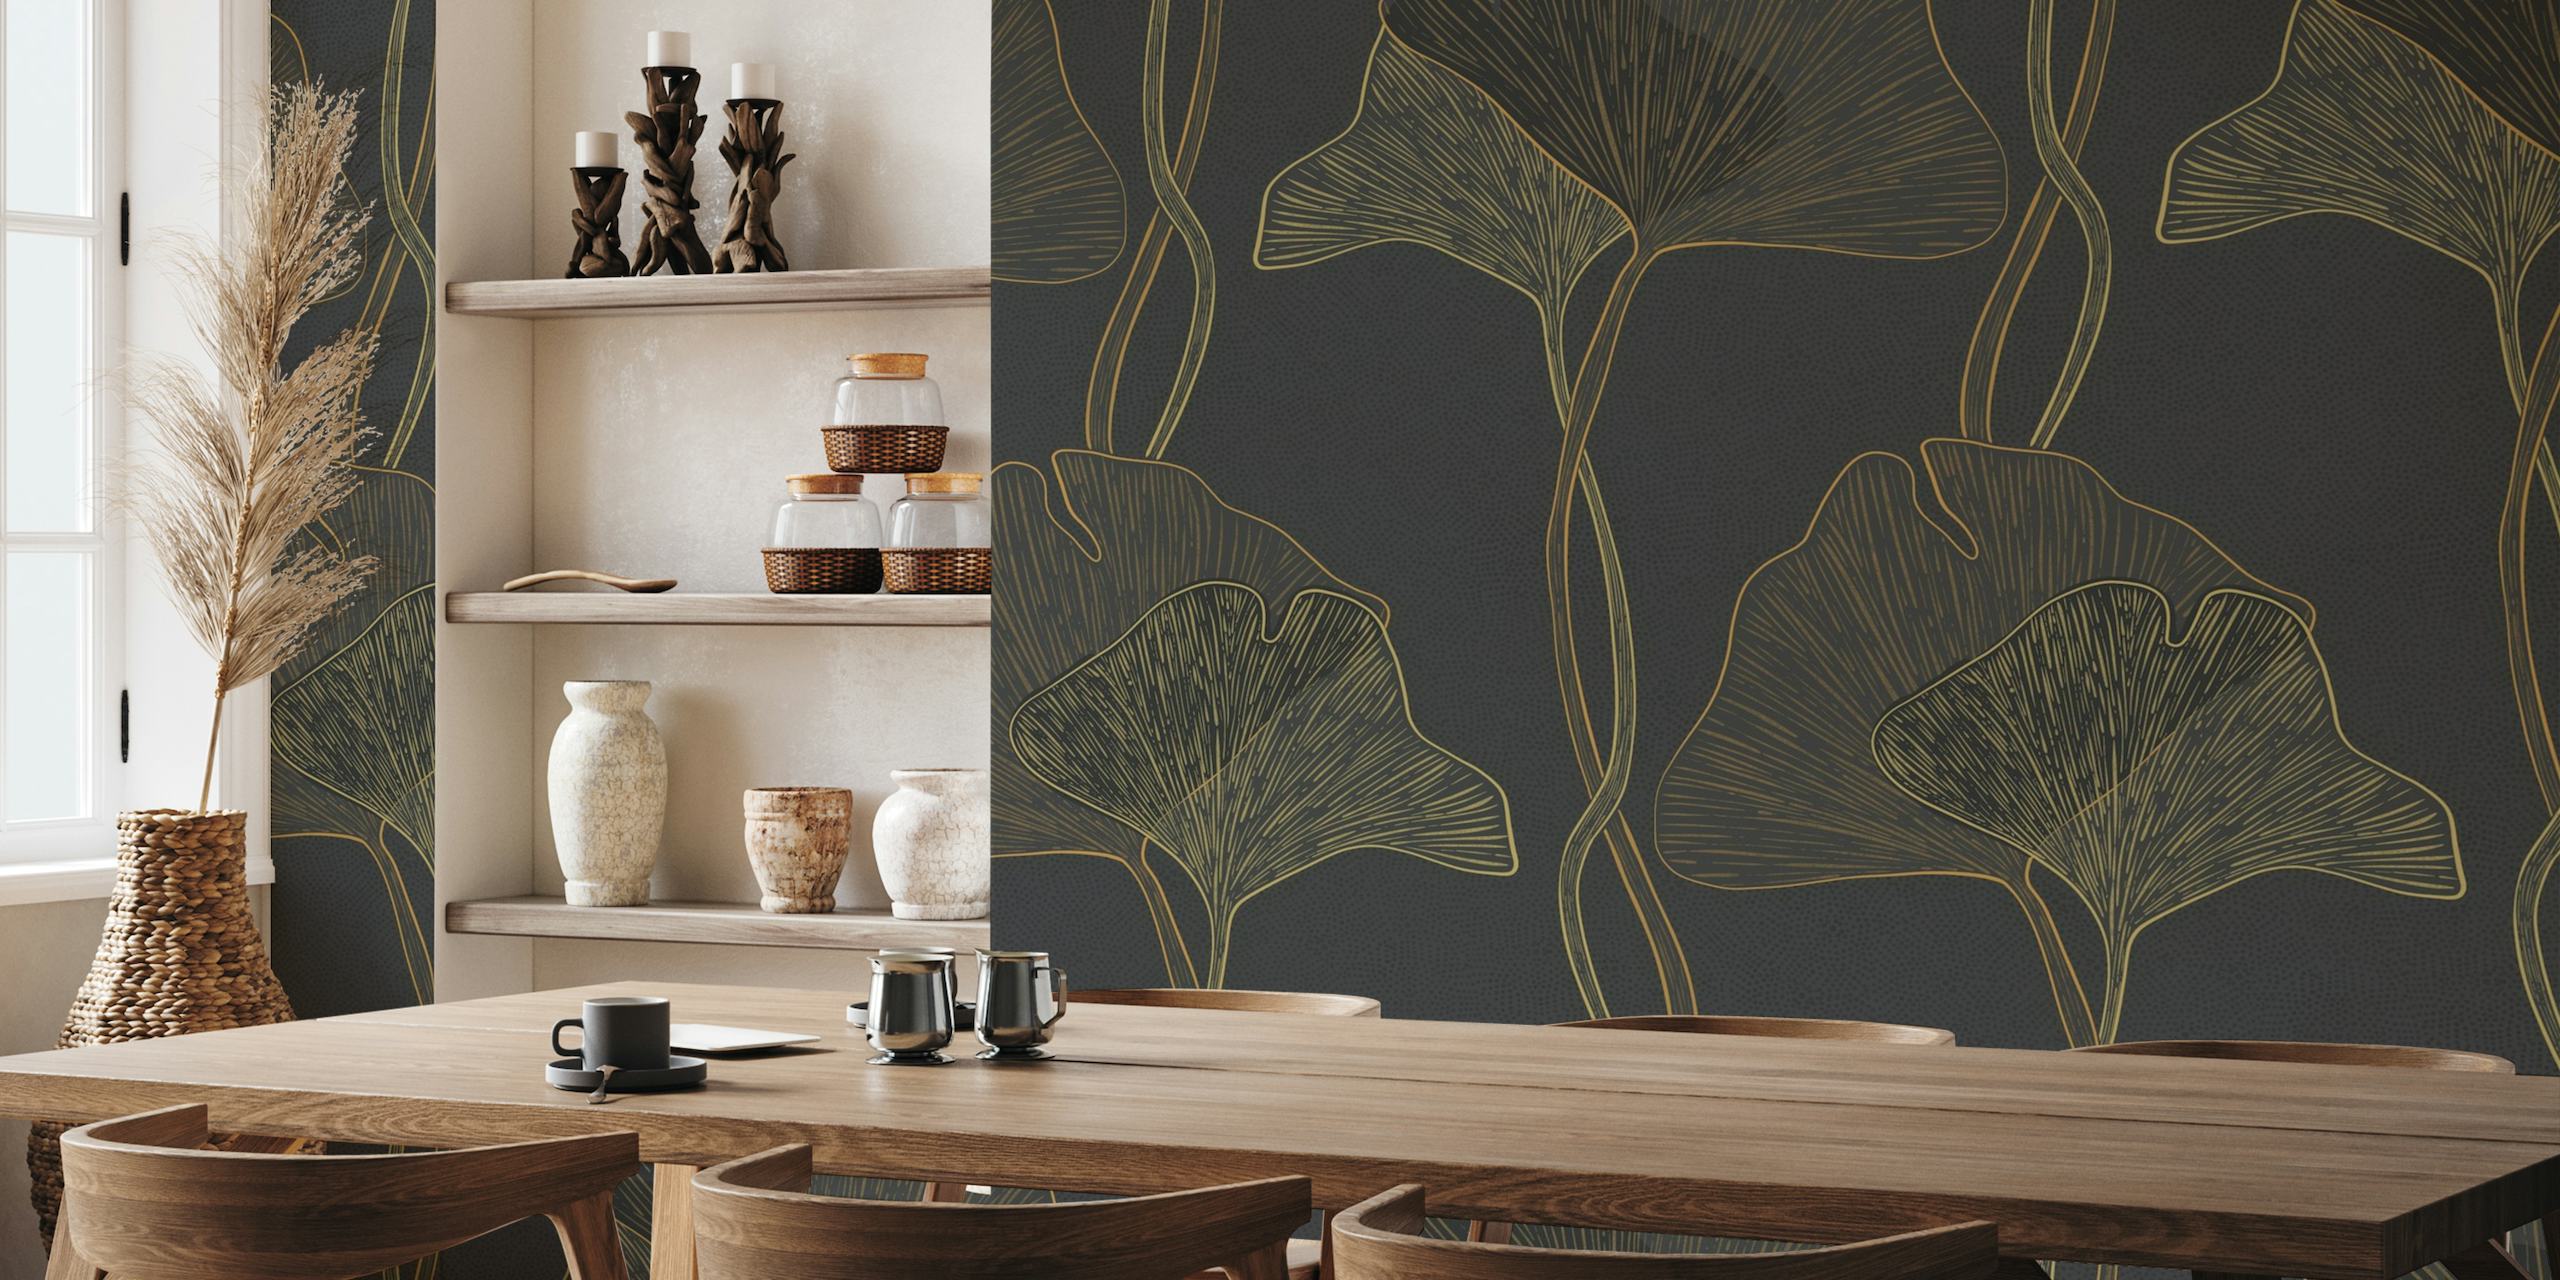 Art Nouveau style ginkgo leaves wall mural with dark background and gold accents.